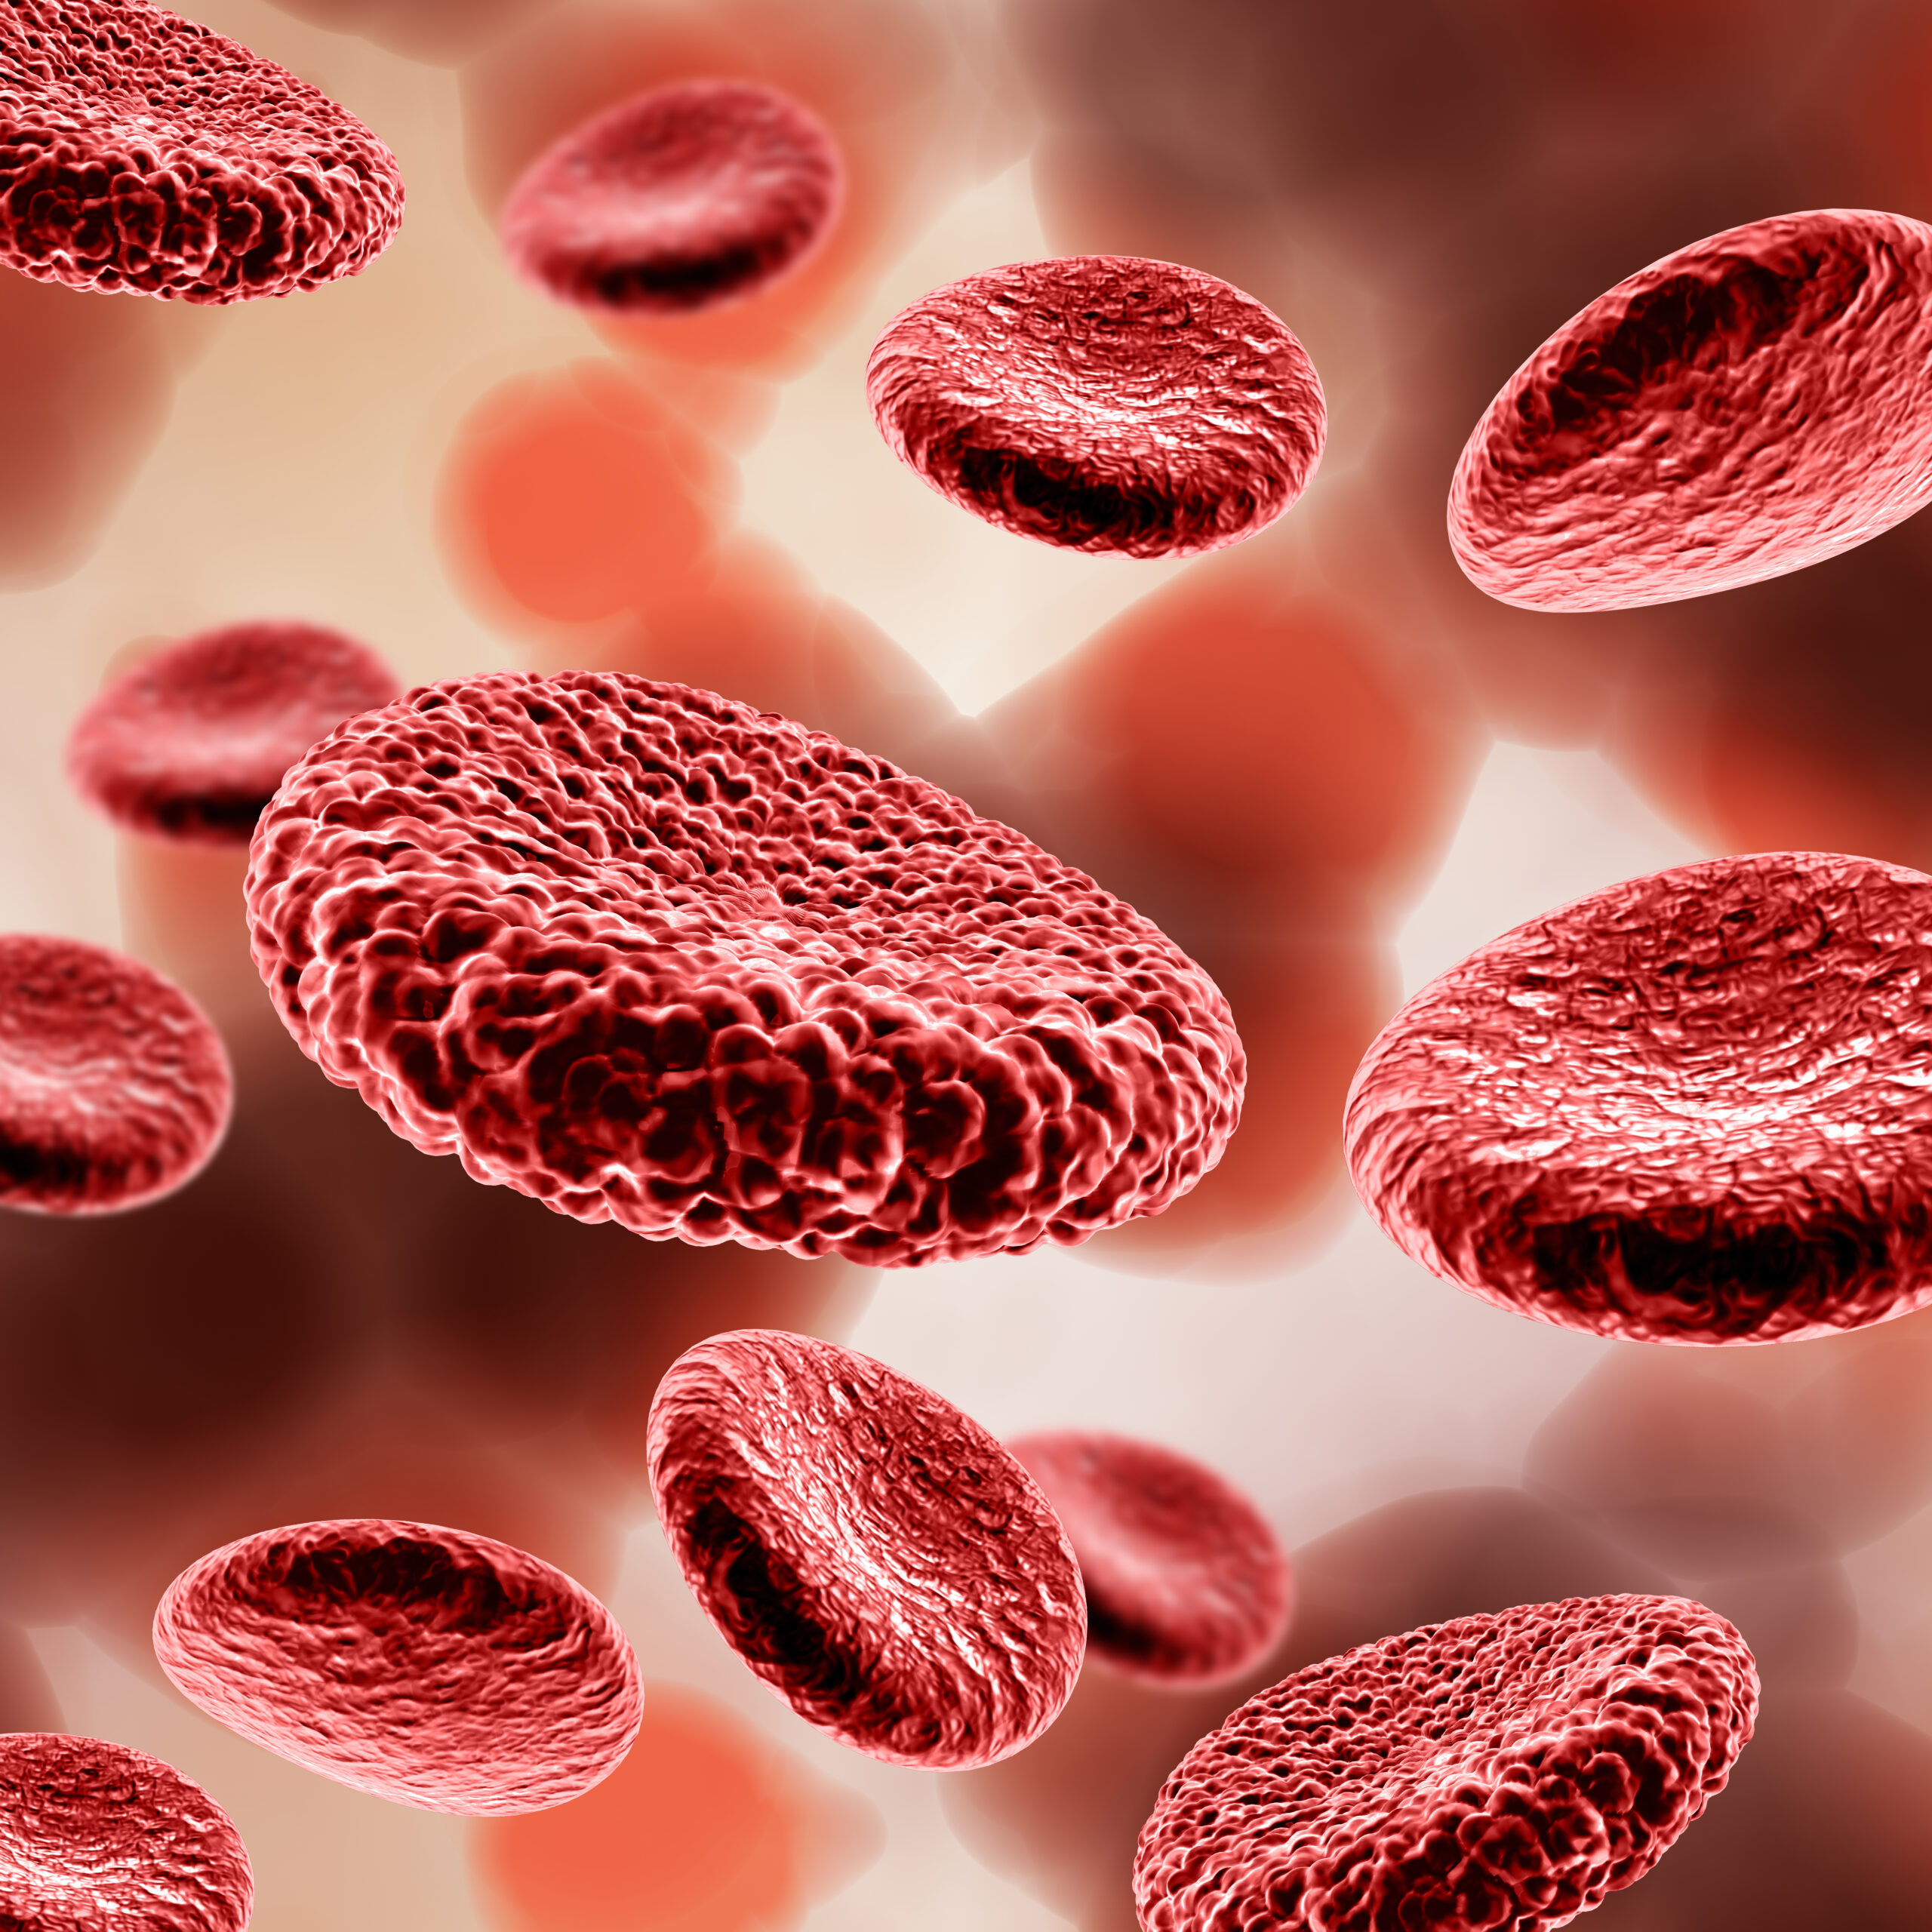 3D render of a medical background with blood cells